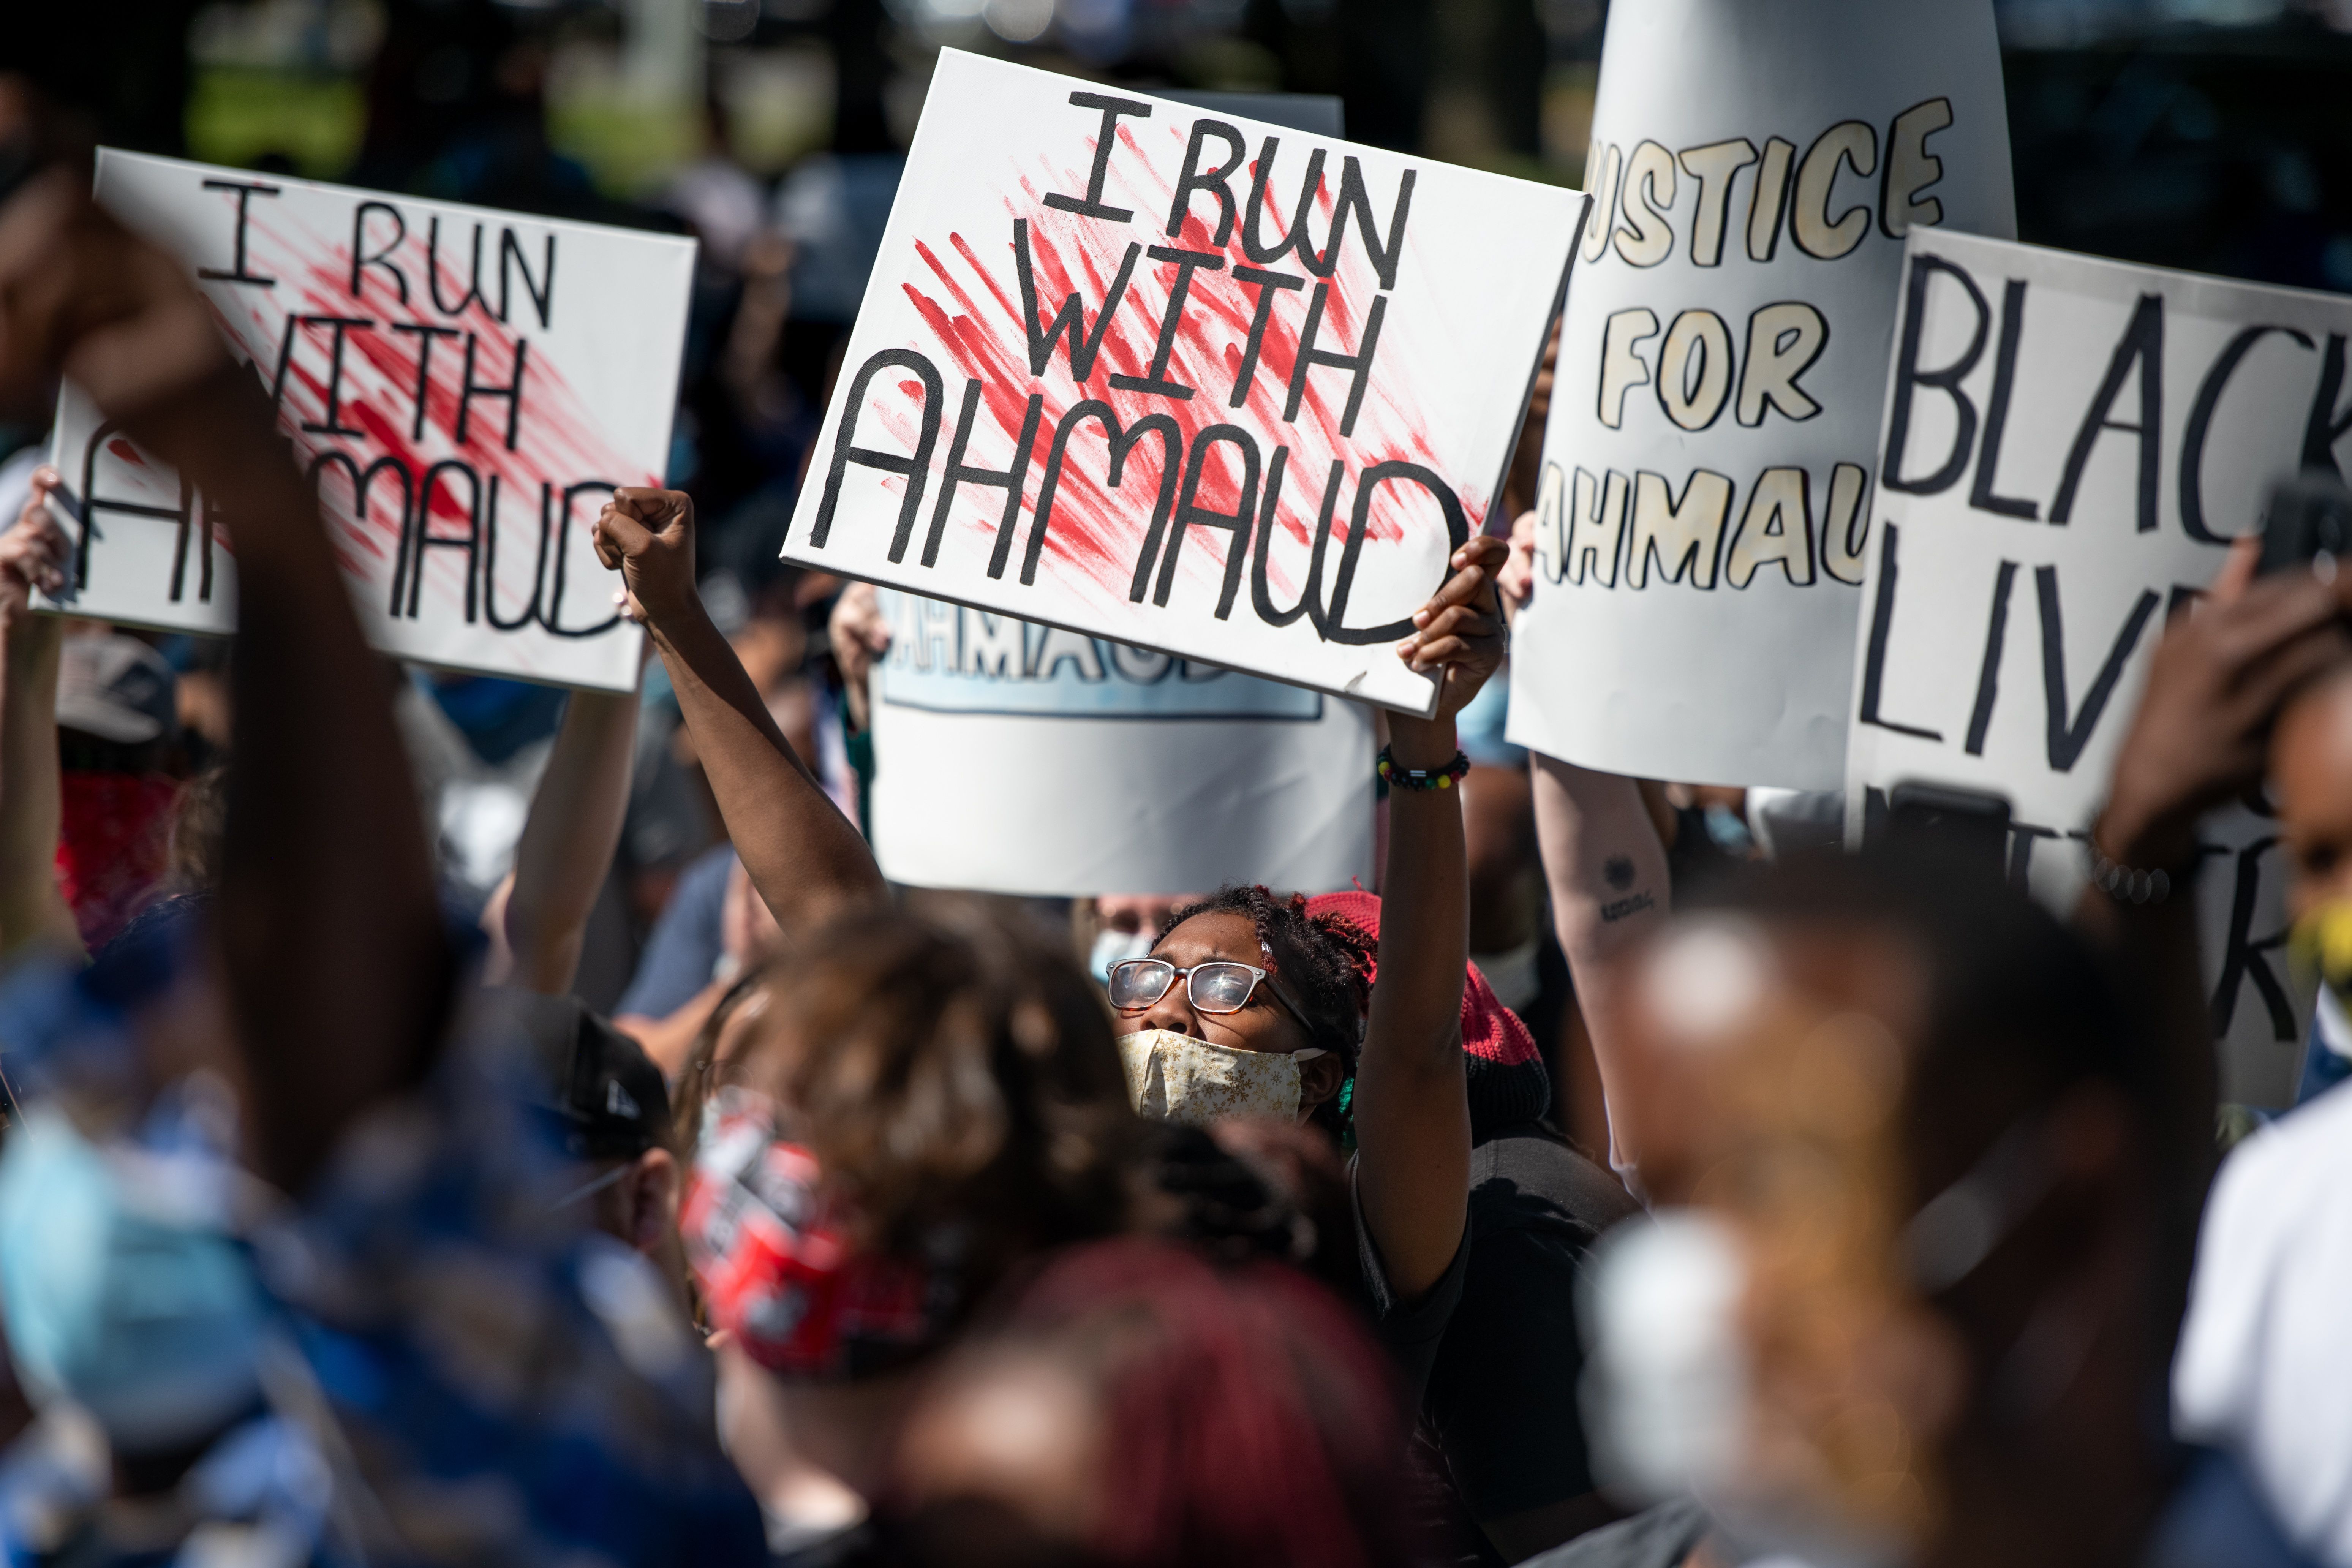 In this image, several people hold signs that read "I run with Ahmaud"